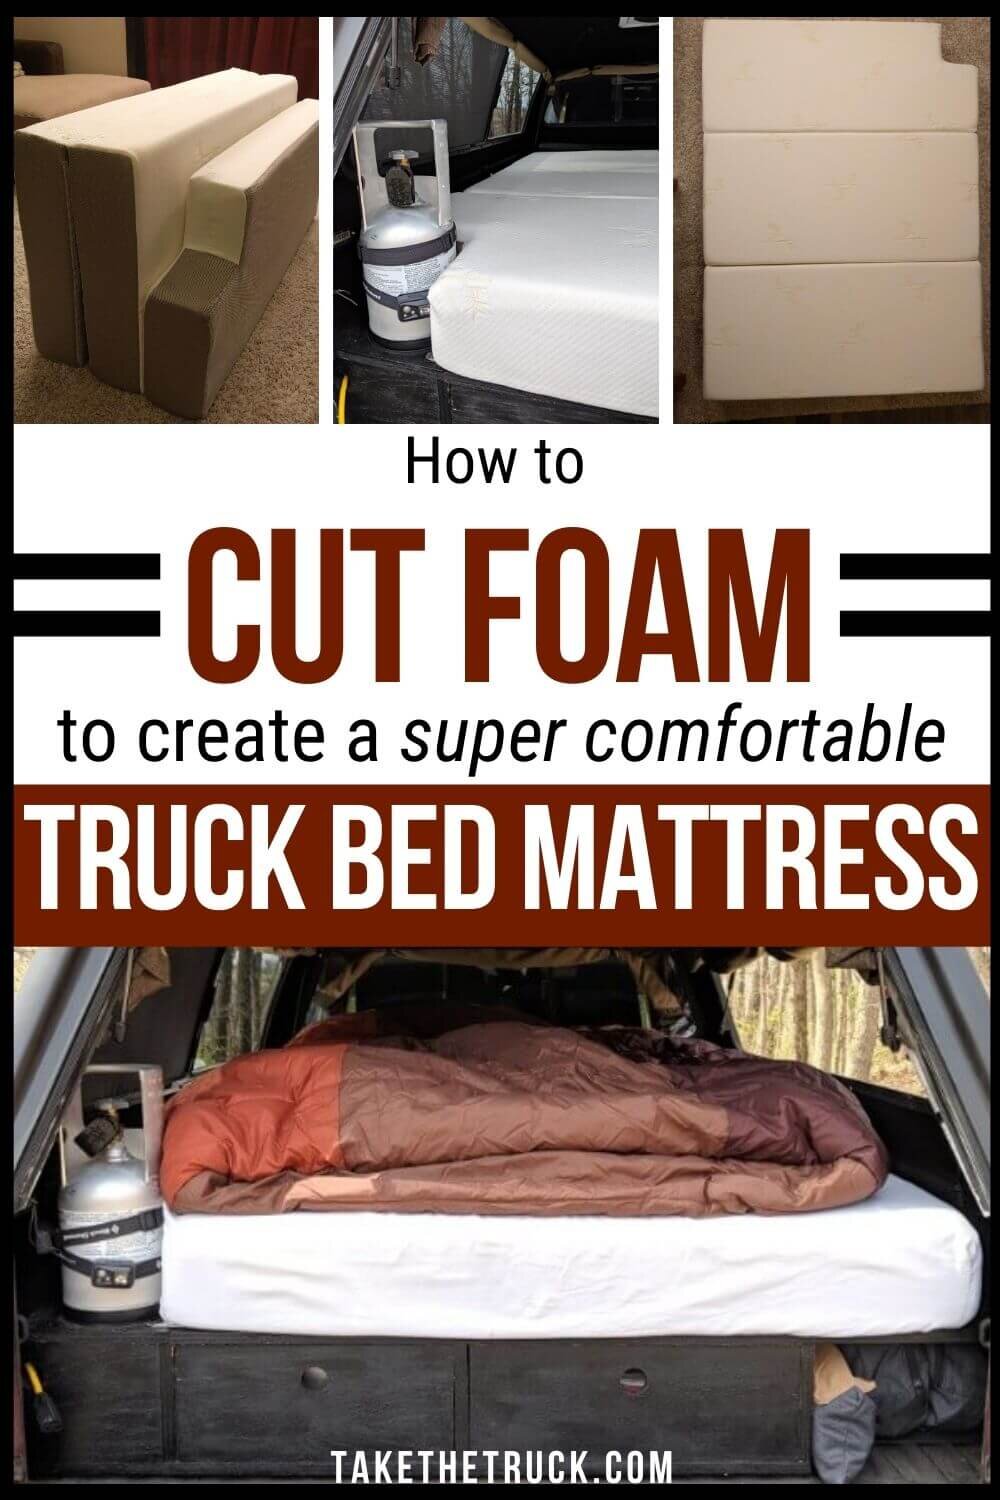 If you need to know how to cut foam, check out this post. Cutting foam or memory foam as a DIY project at home is really easy to do! We made the perfect camping mattress by knowing how to cut foam.